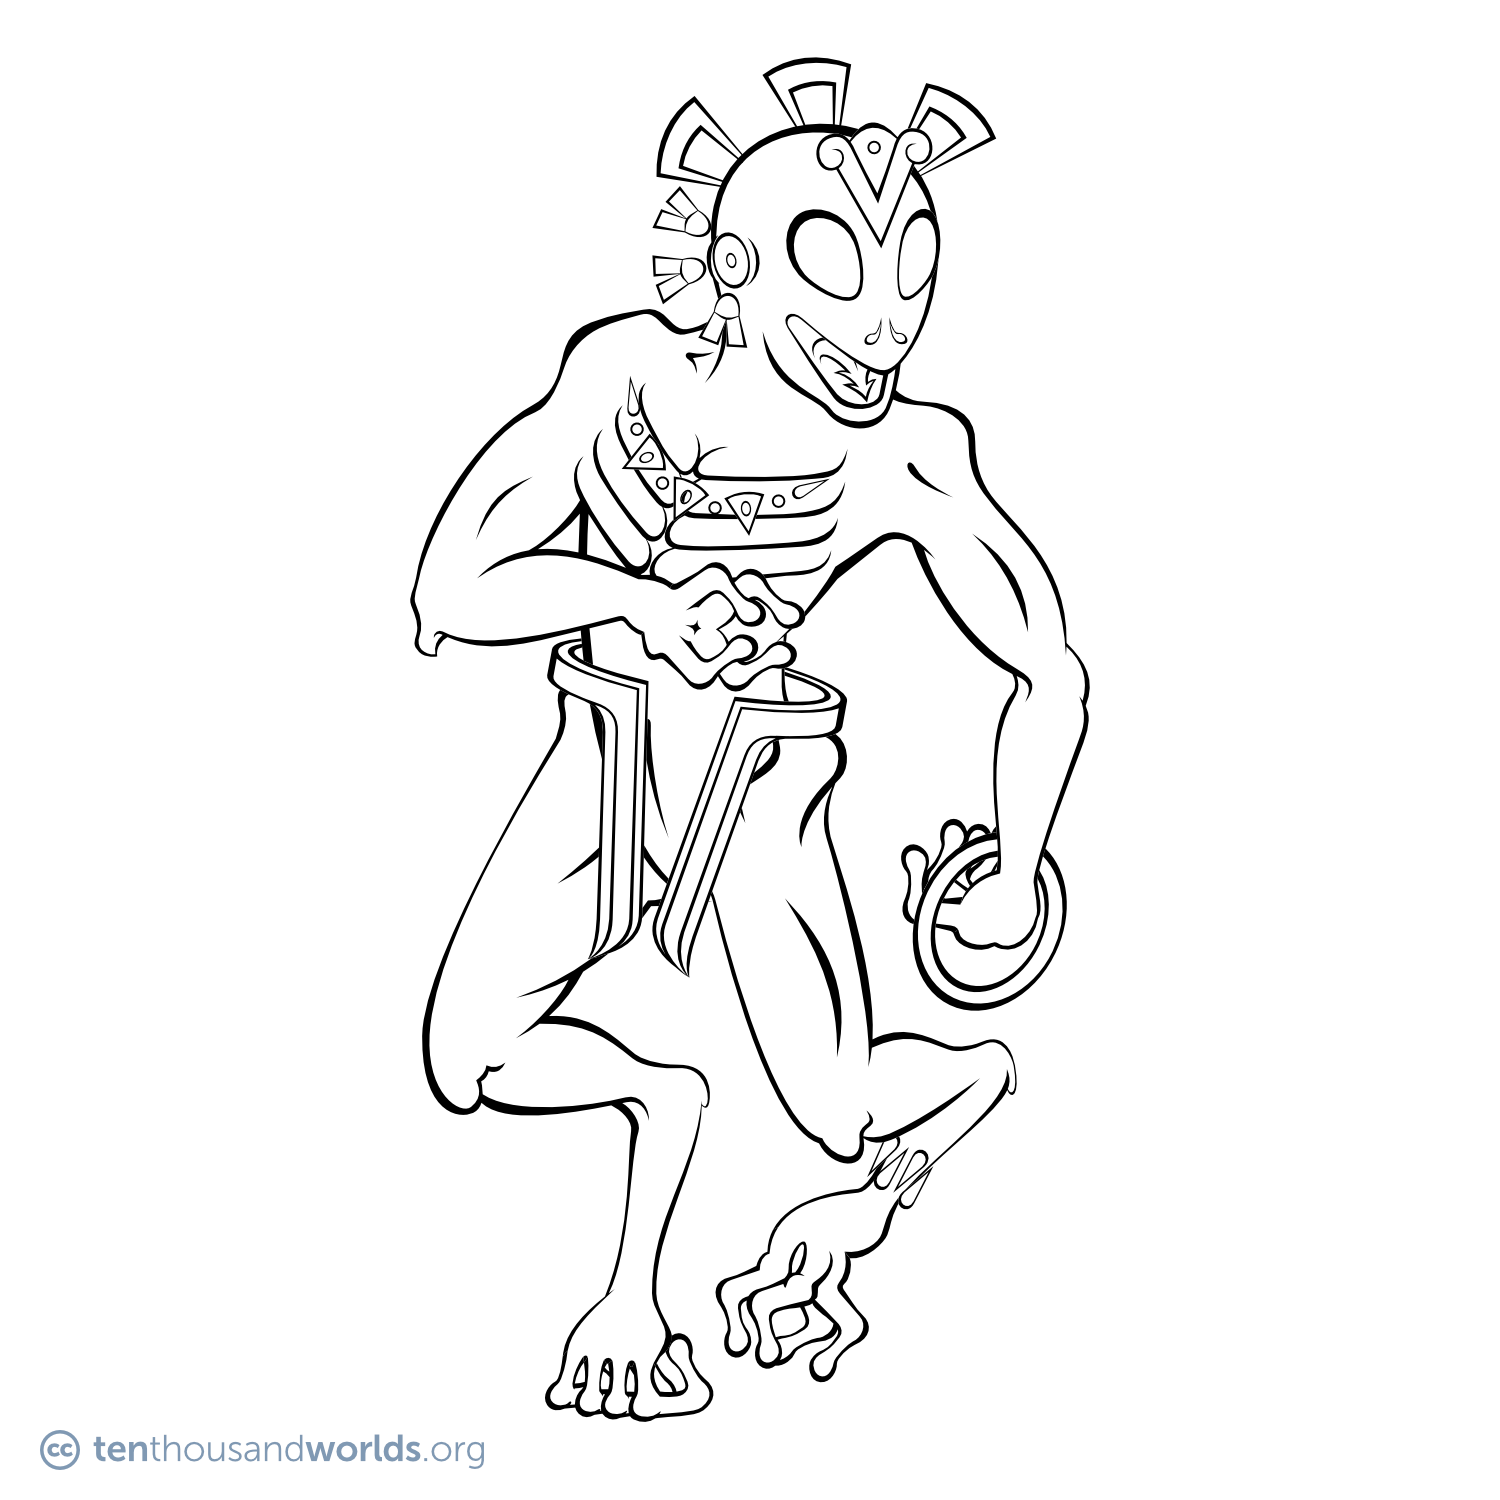 An ink outline of a gaunt being with large prominent ribs, legs bearing an extra joint, and a smooth, oval, almost reptilian head. Hooks poke out of its elbows and leg joints. Each limb ends in four rotating thumb-like digits. A long barbed tongue coils in its mouth. Pieces of geometric ornamentation float in place over its body: a headdress, ear plug, pectoral, hip guards, and anklet. A sharp throwing ring rests in one hand.